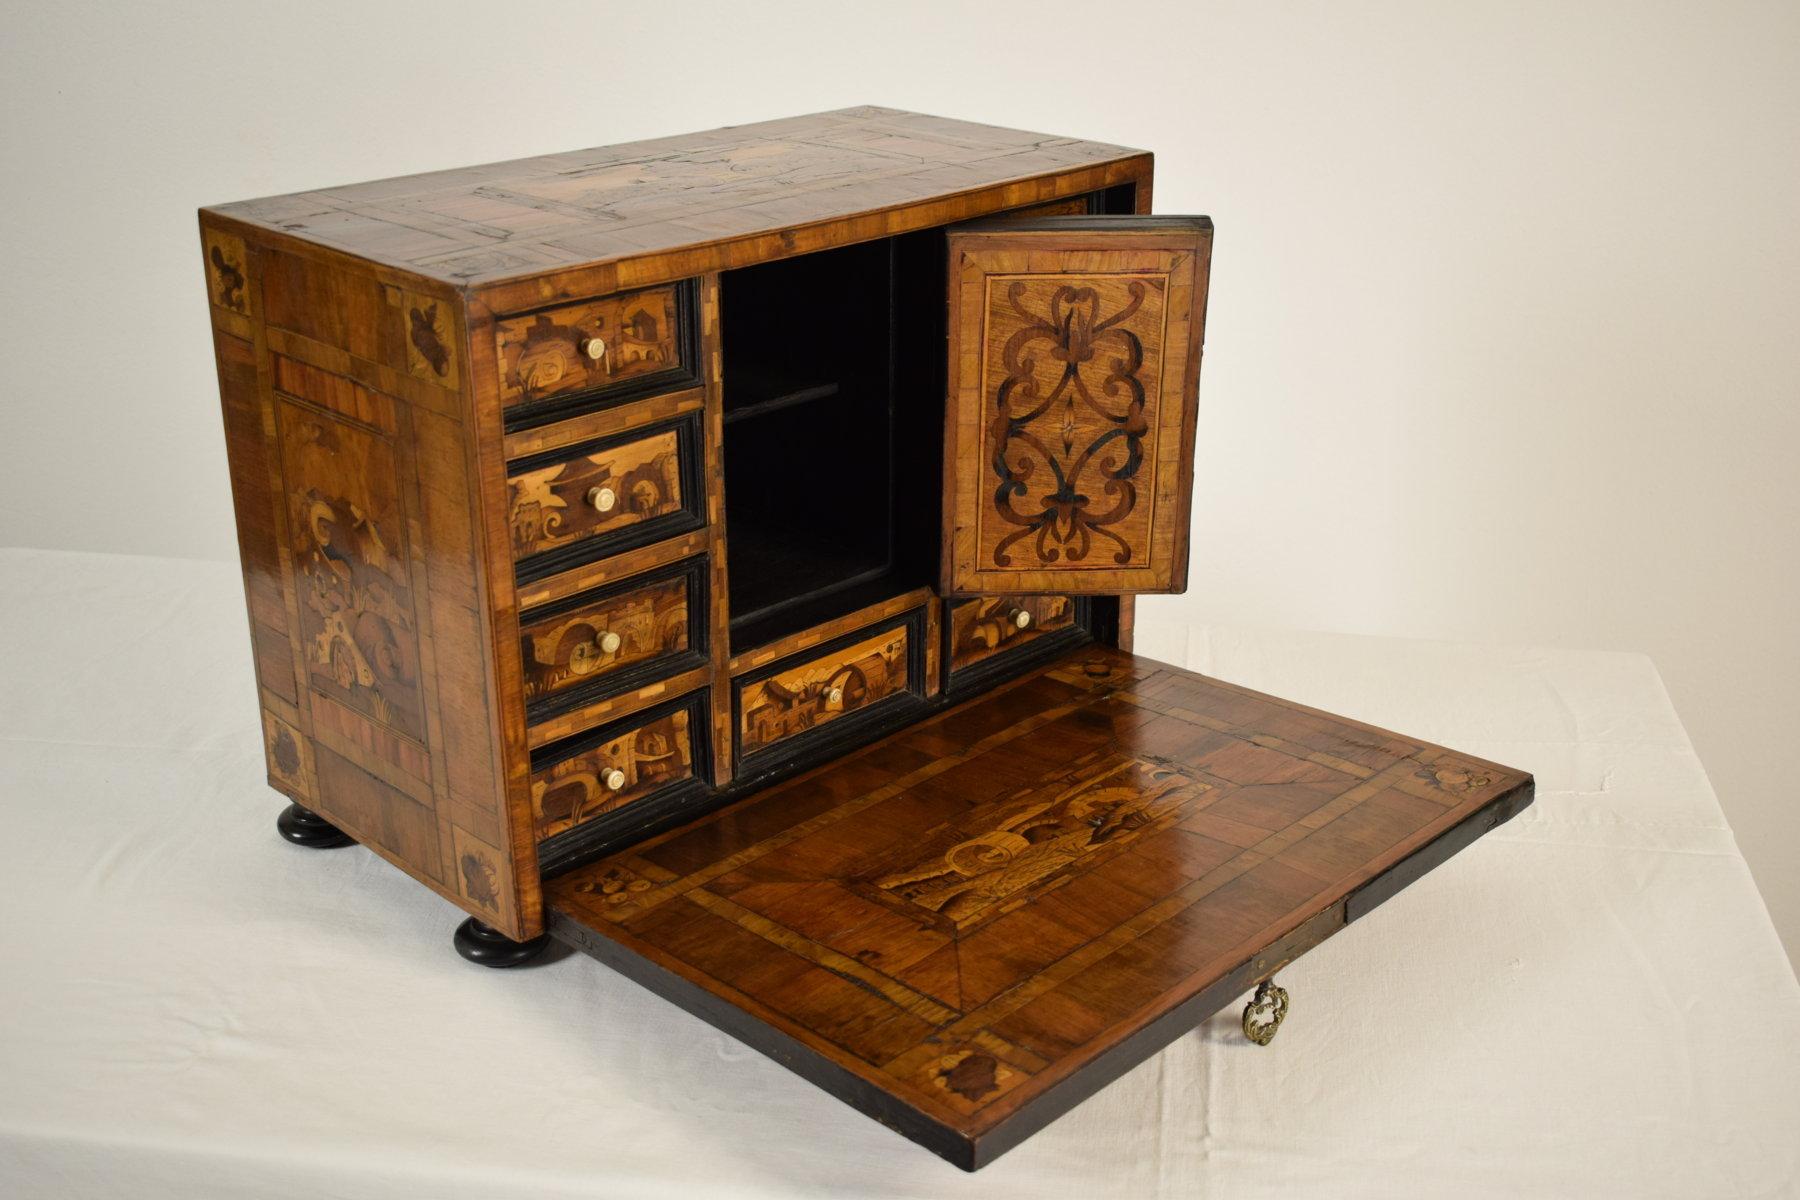  17th Century, German Wood Apothecary Cabinet with Fantasy Architectures For Sale 4